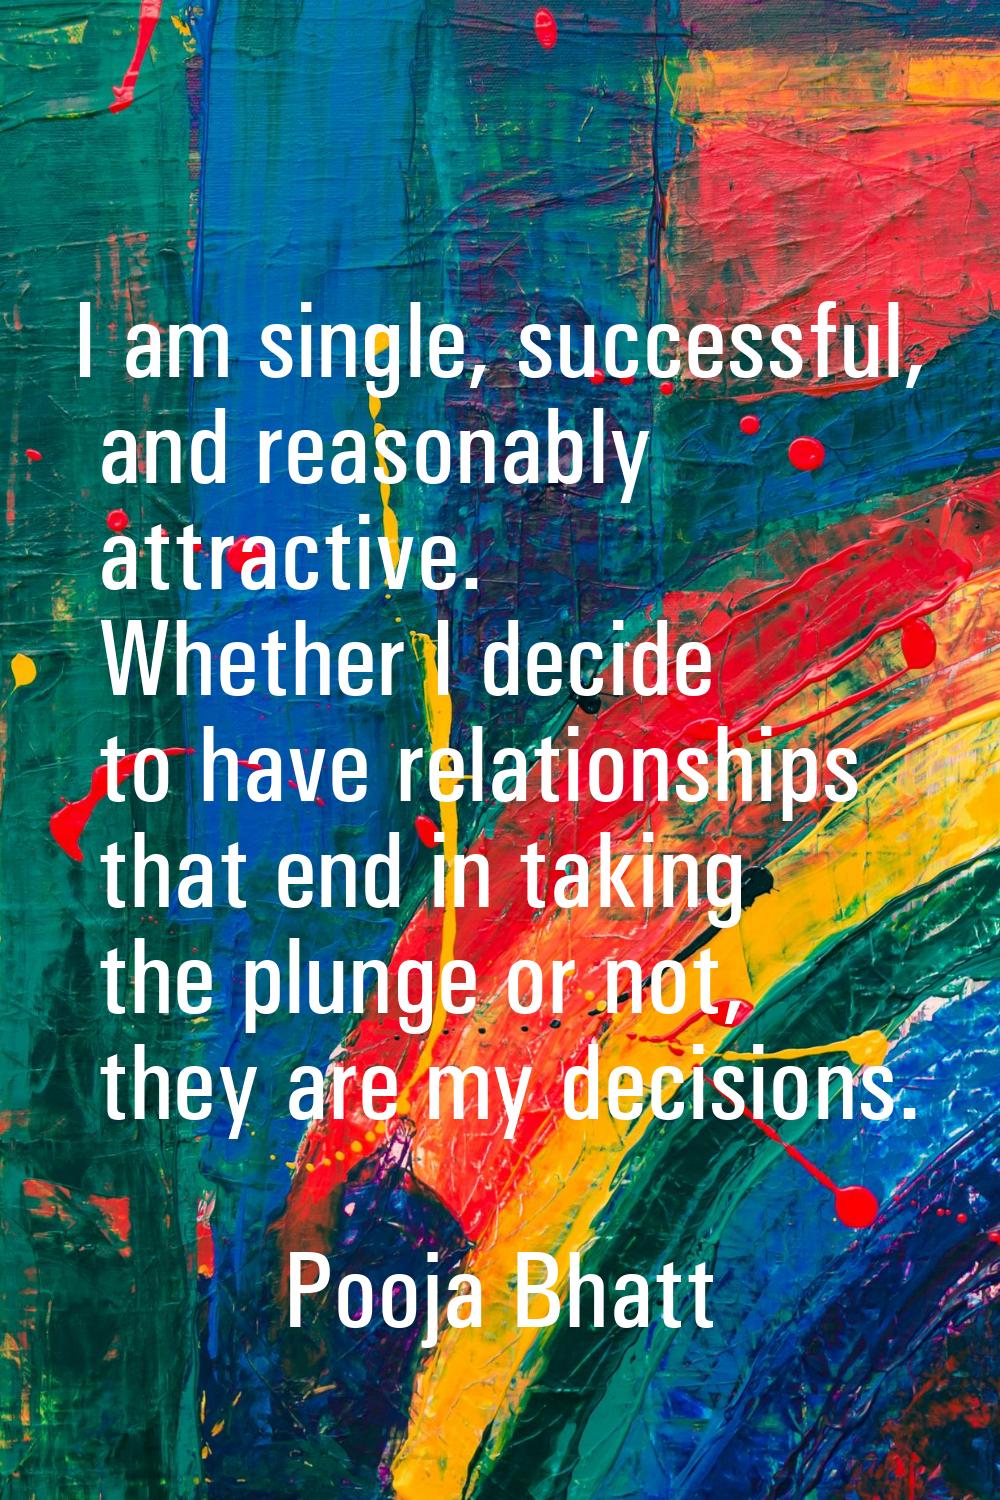 I am single, successful, and reasonably attractive. Whether I decide to have relationships that end